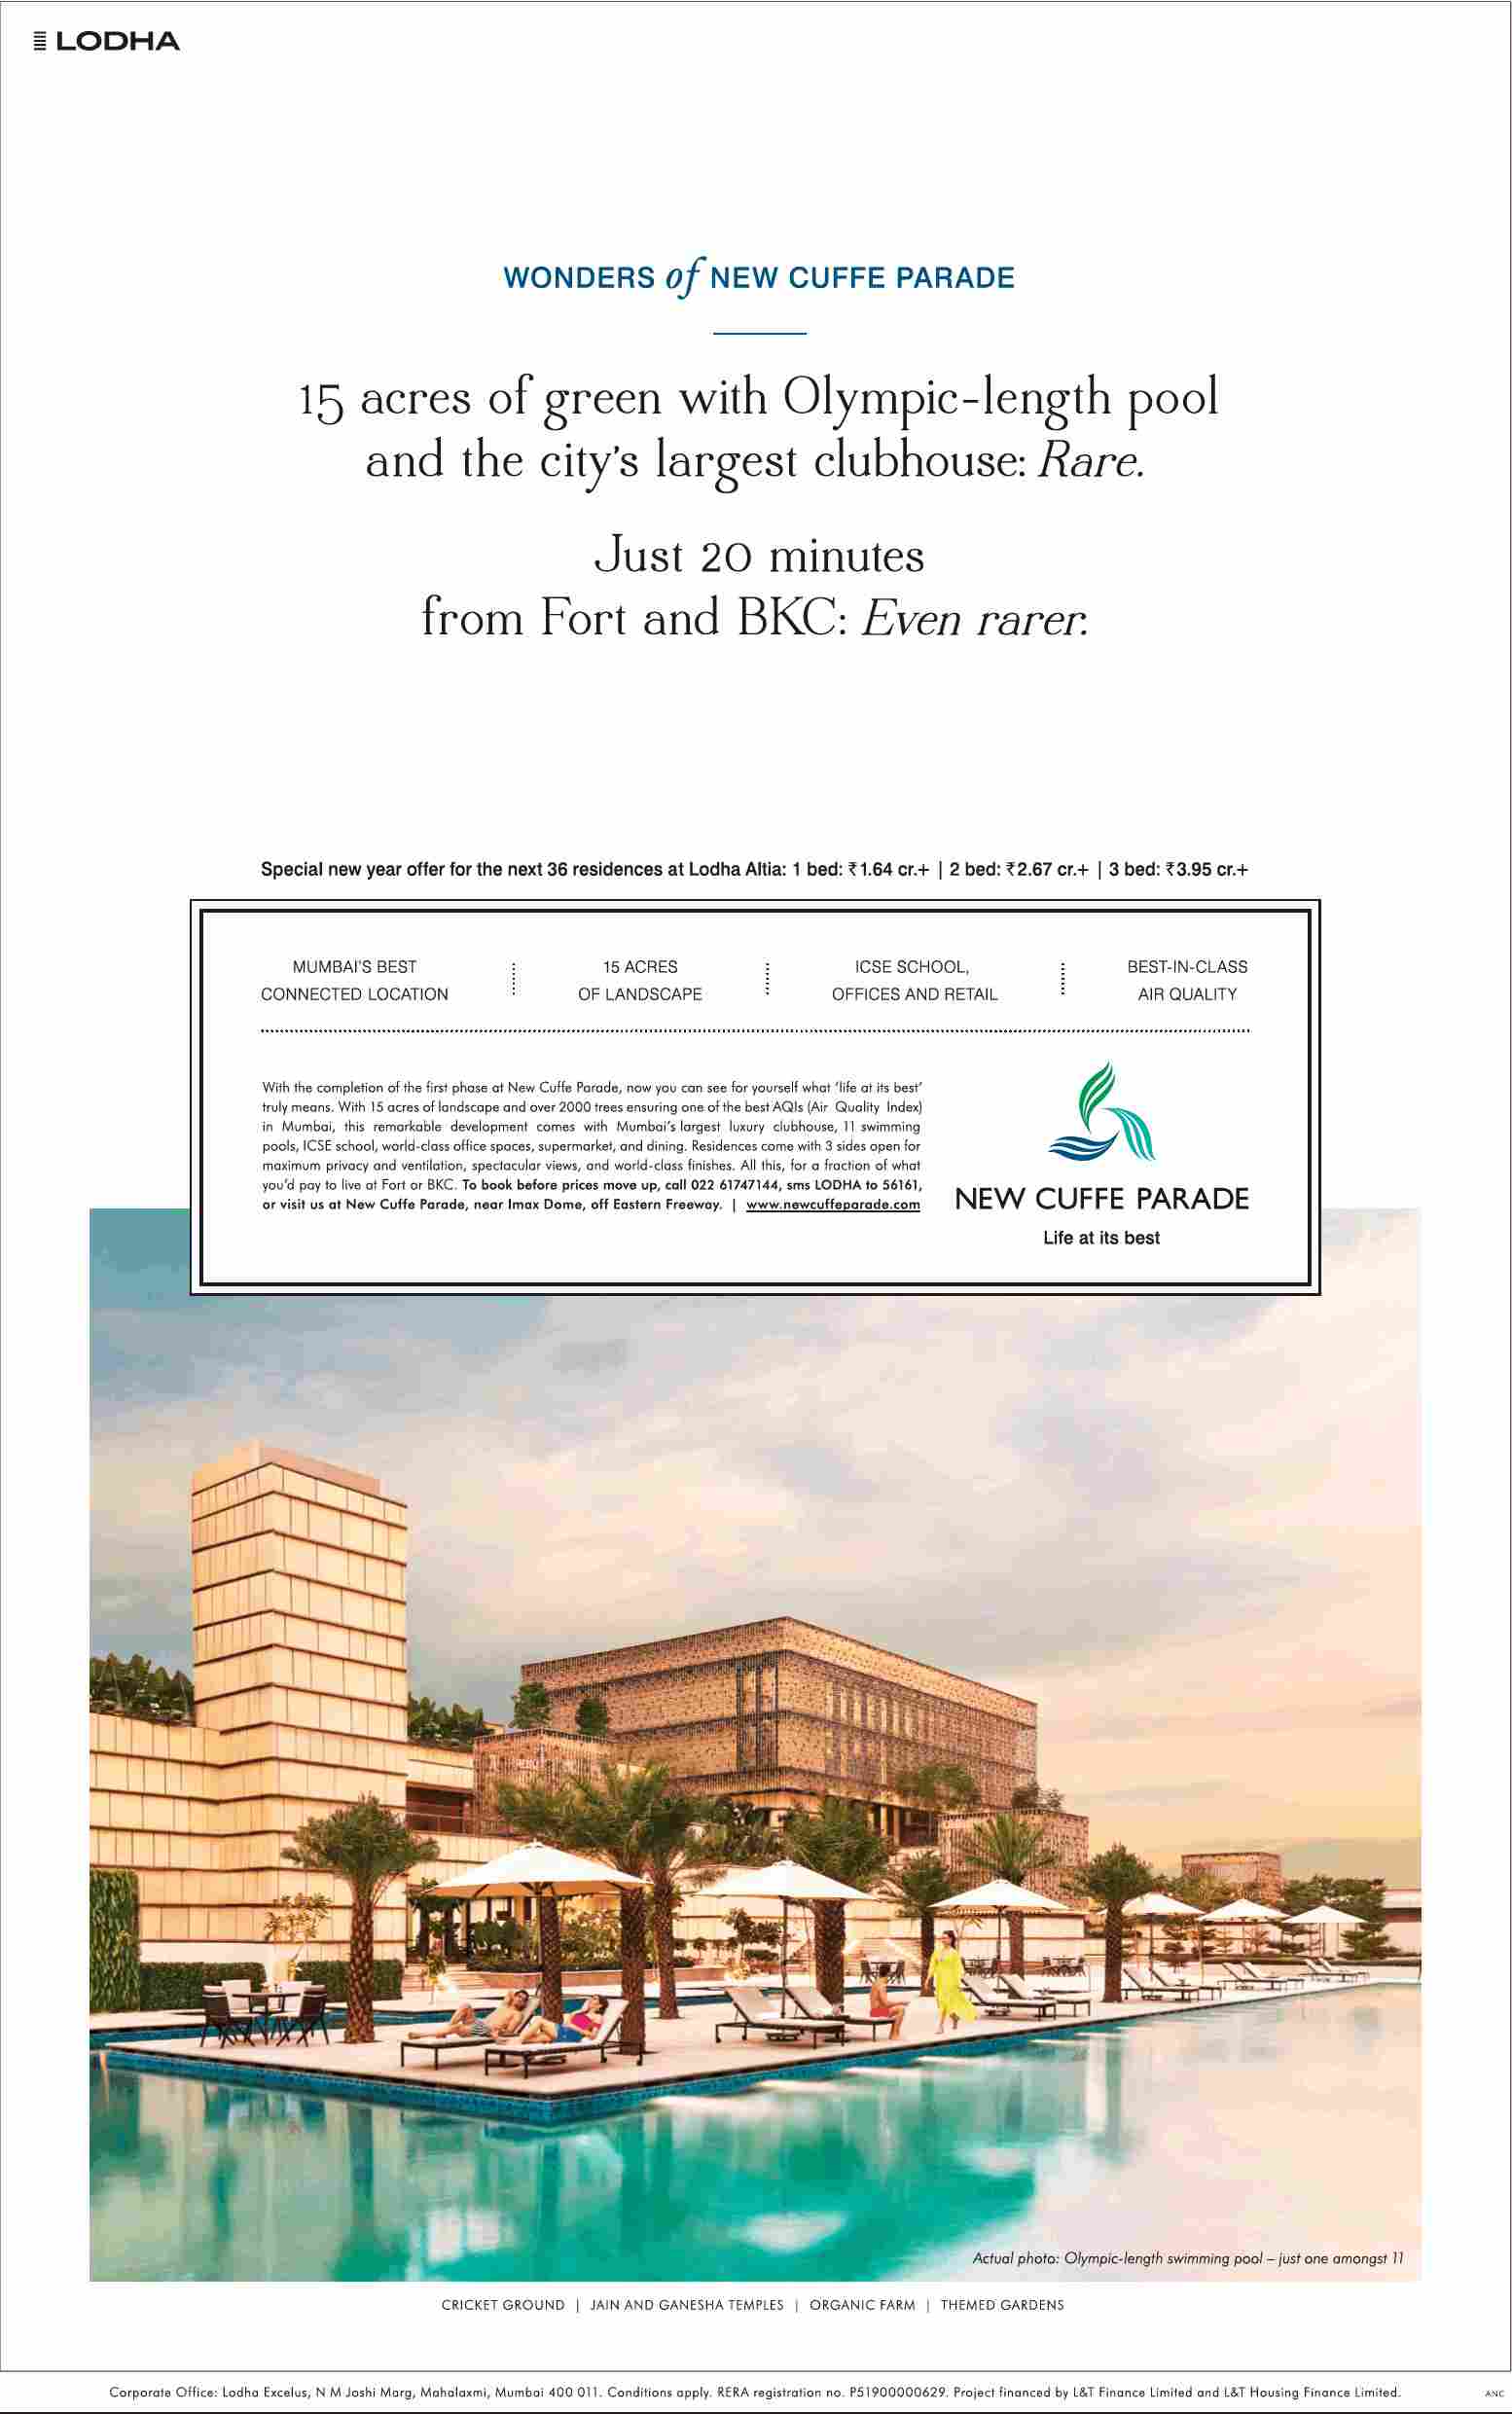 Enjoy 15 acres of green with Olympic-length pool & the city's largest clubhouse at Lodha New Cuffe Parade in Mumbai Update